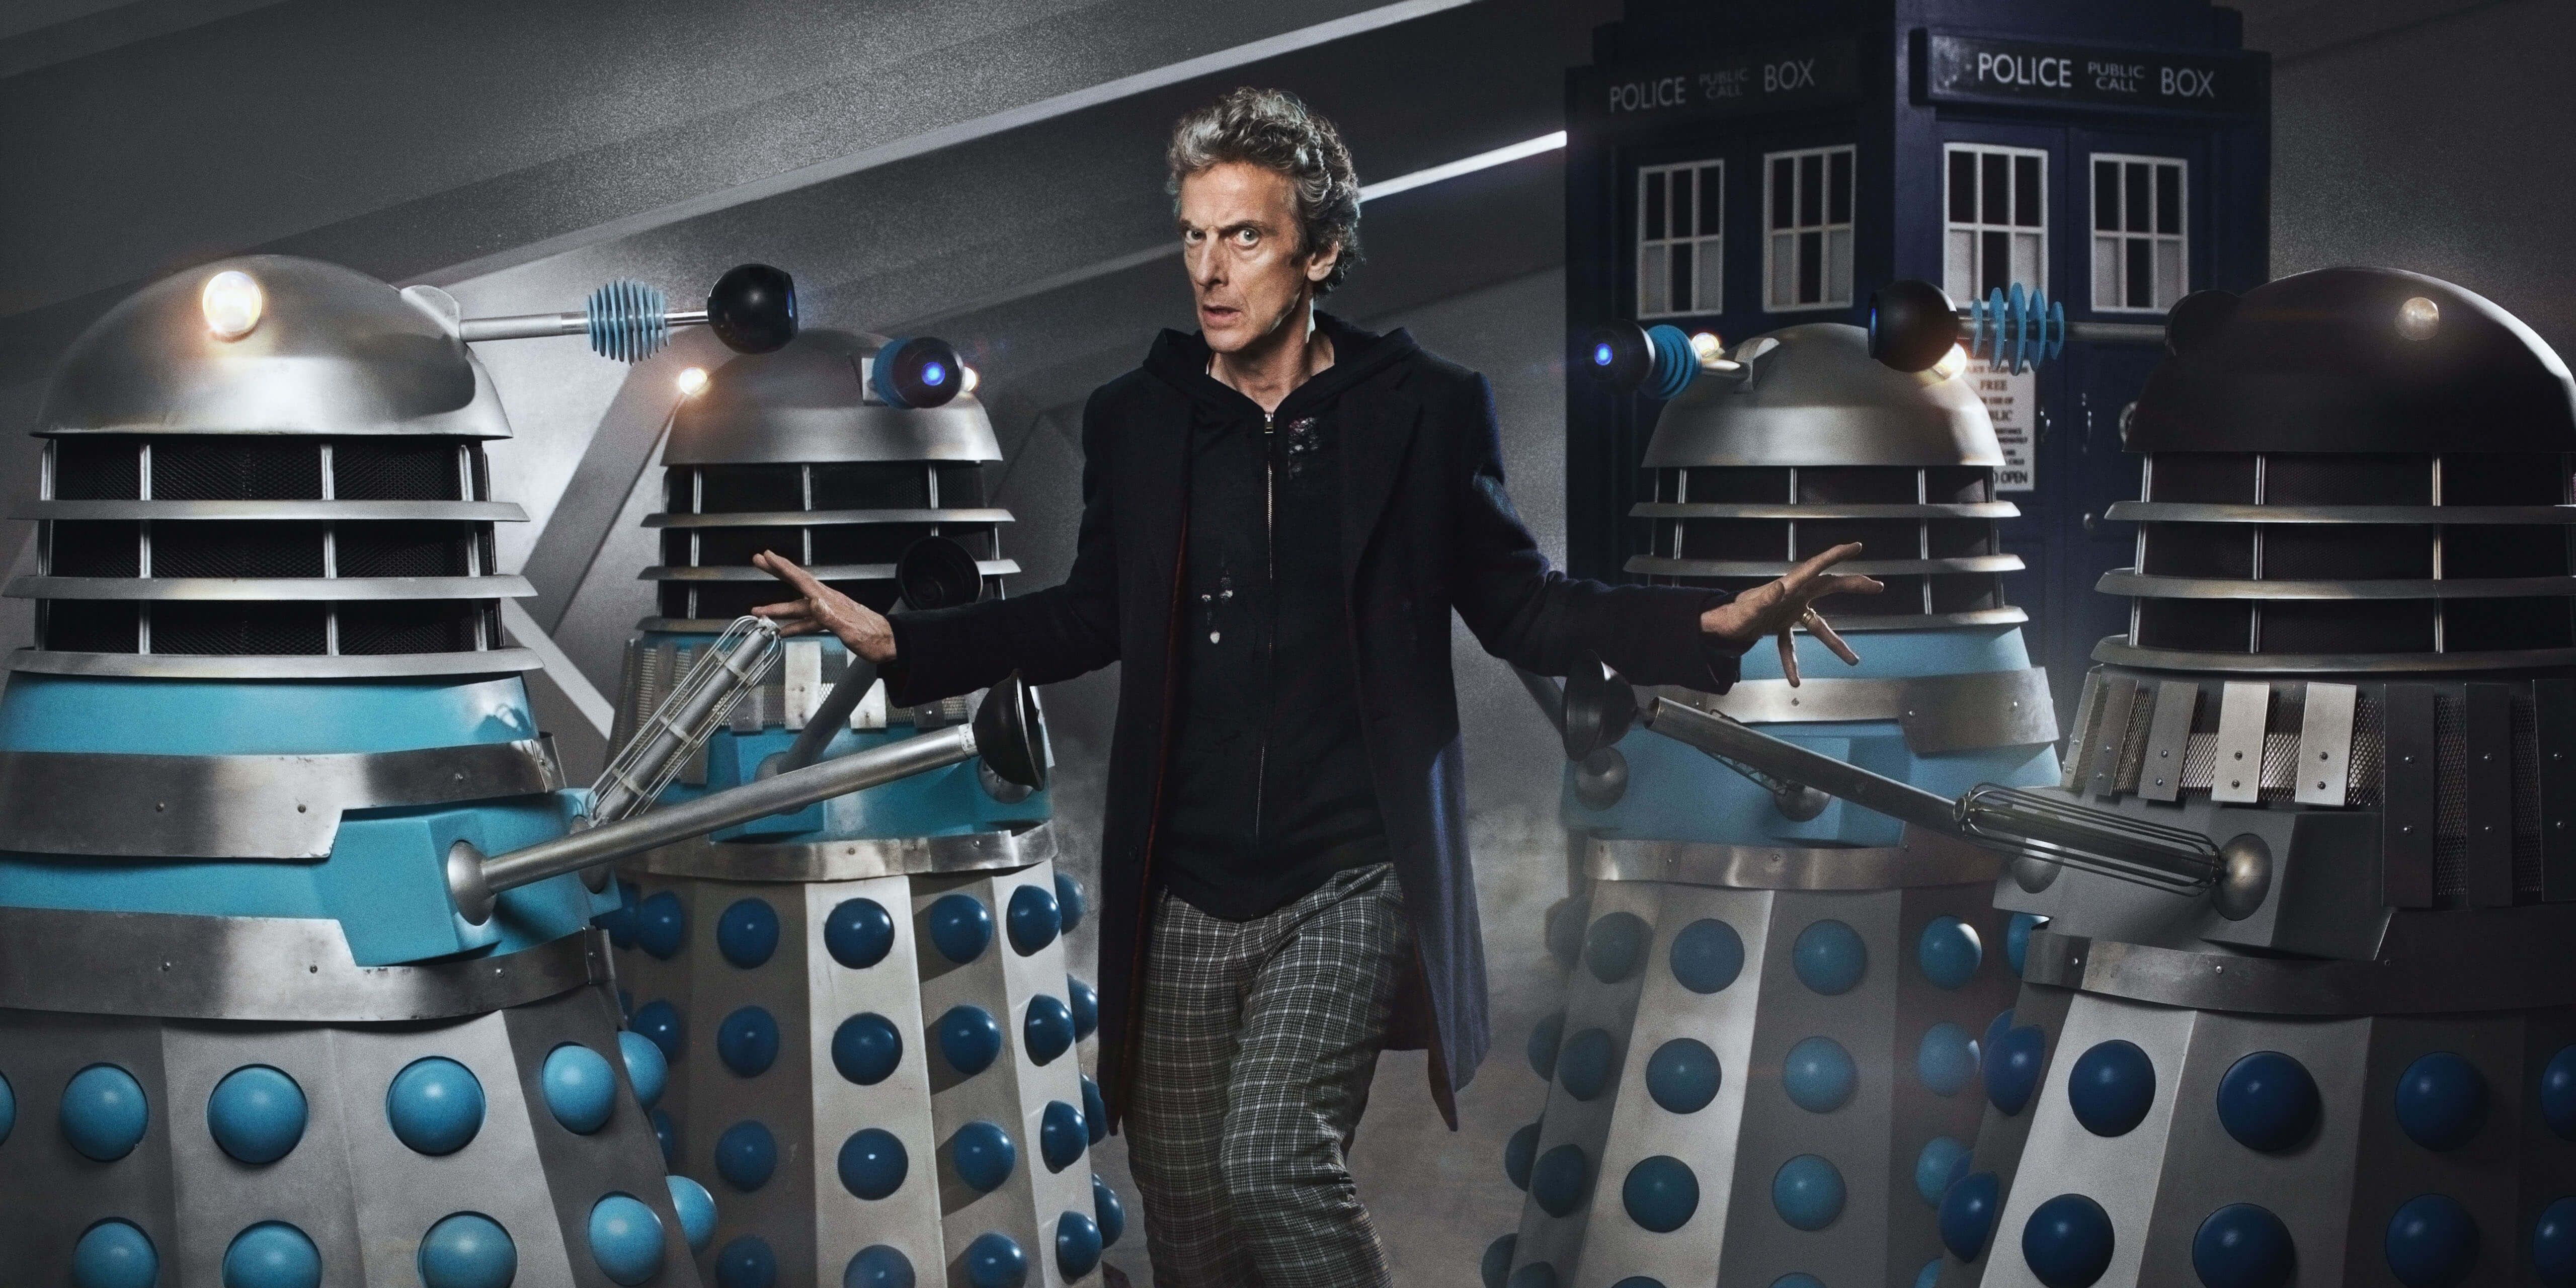 Dr. Who: The Twelfth Doctor surrounded